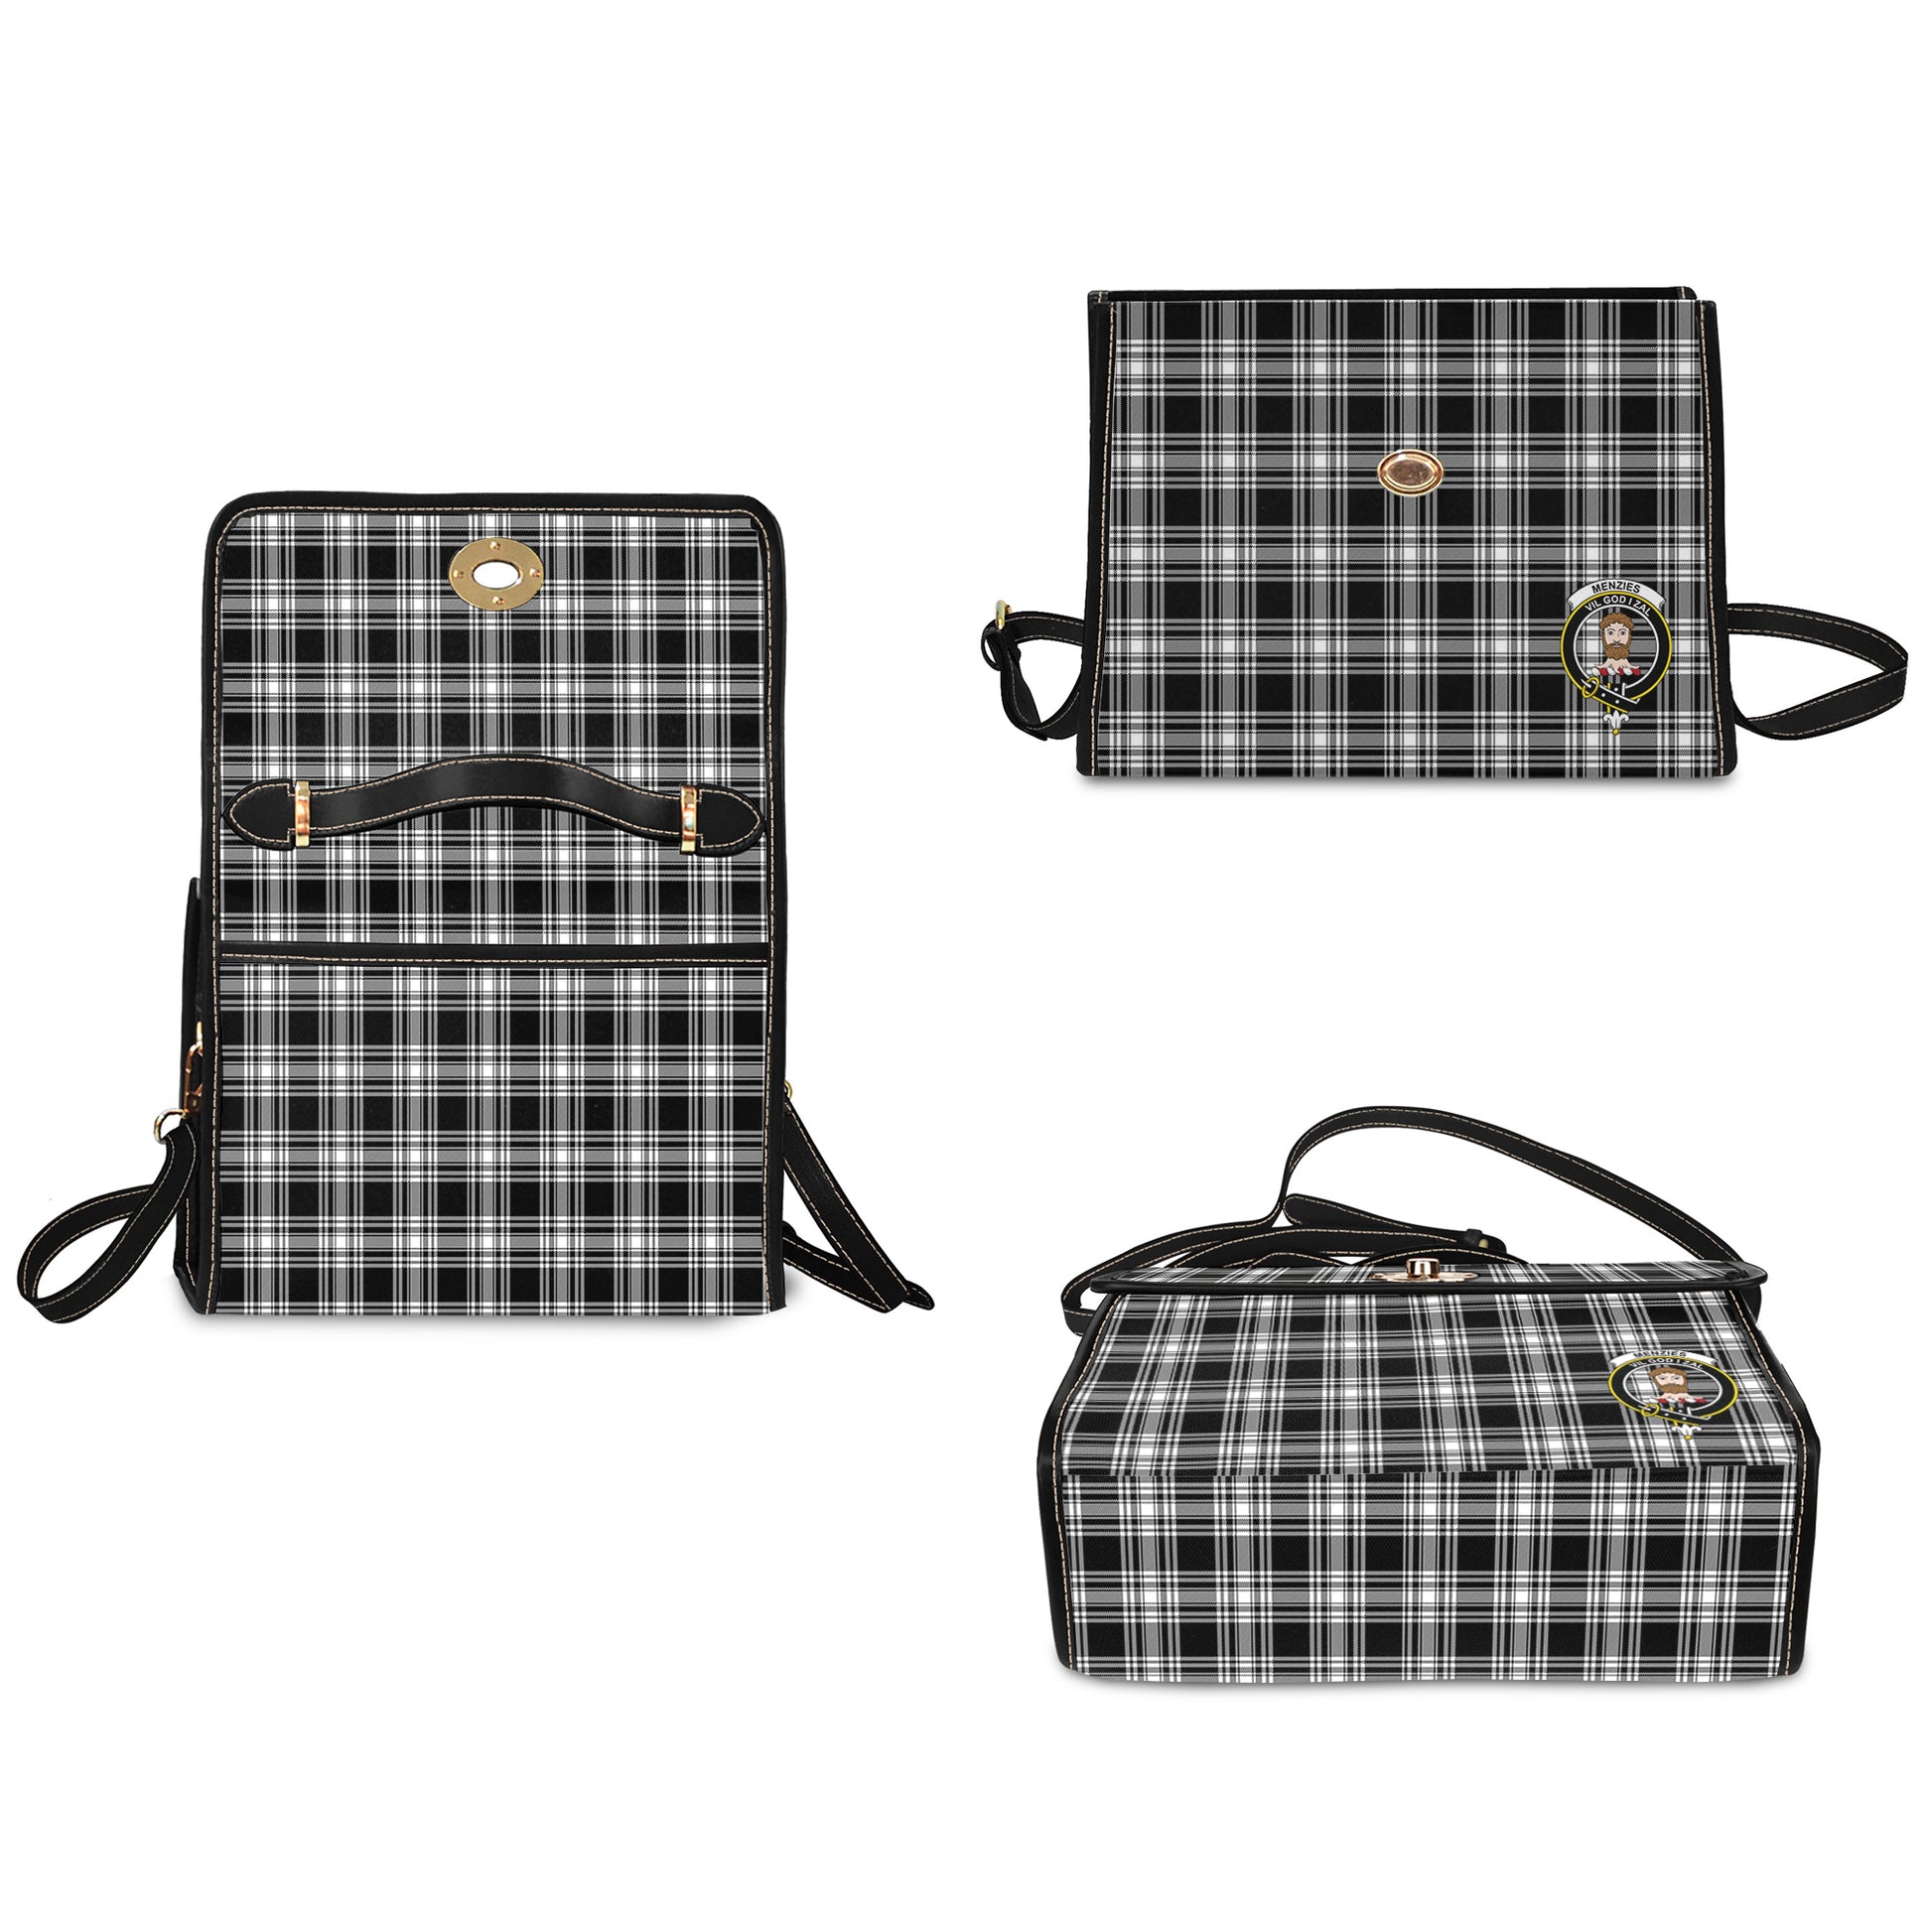 menzies-black-and-white-tartan-leather-strap-waterproof-canvas-bag-with-family-crest